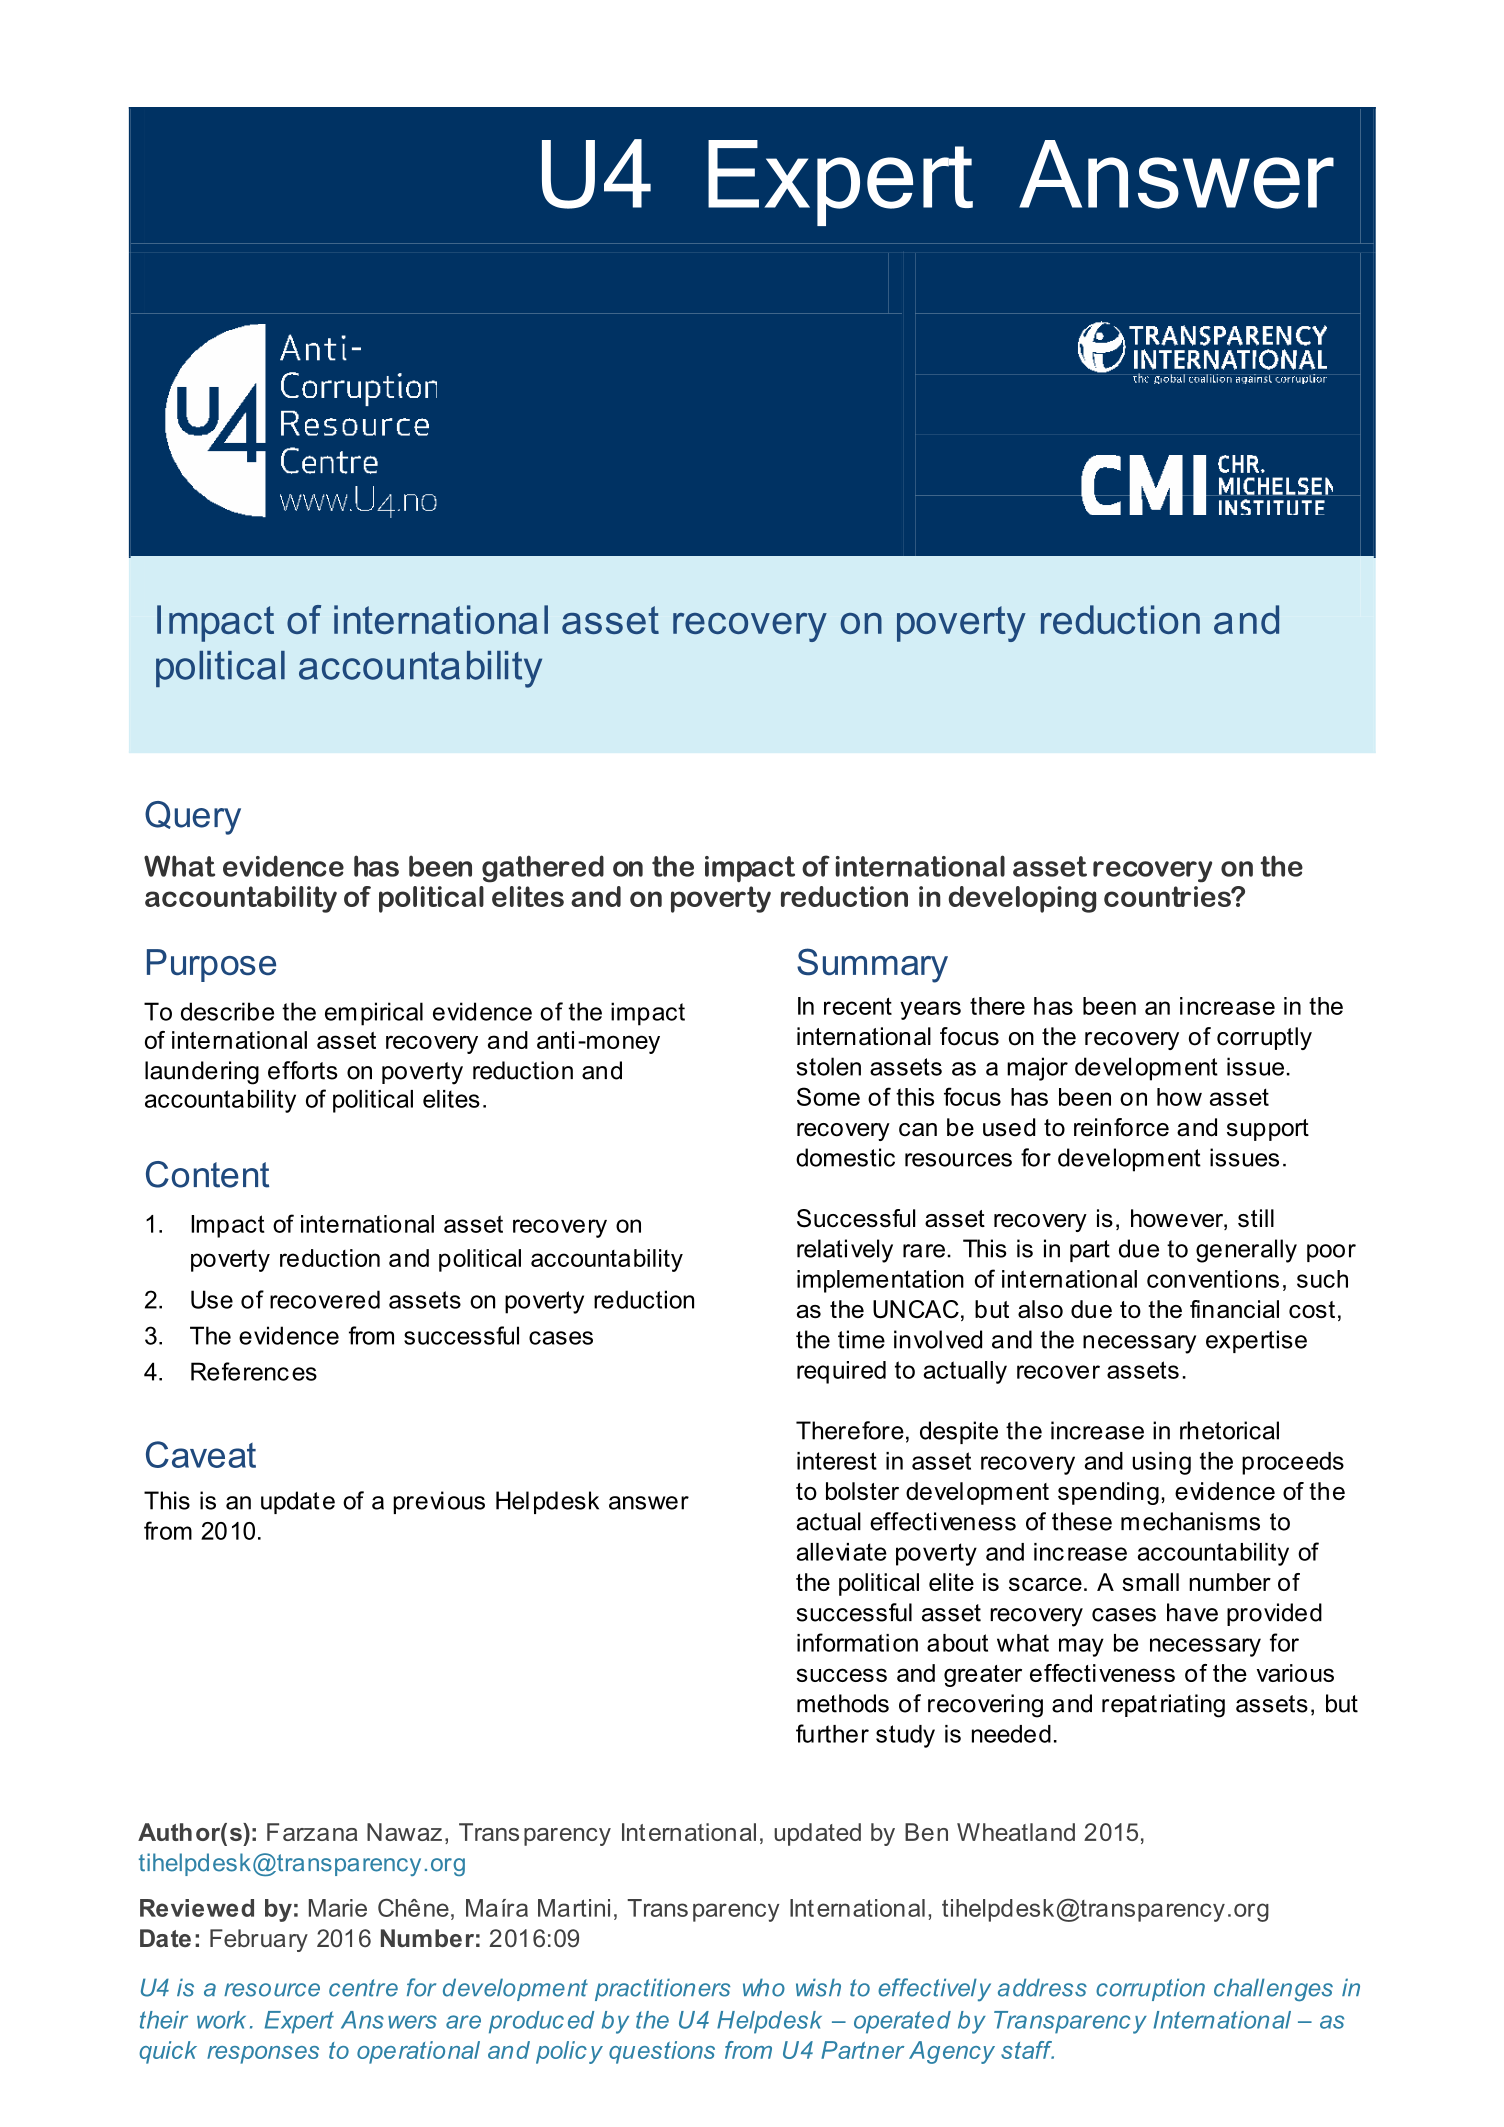 Impact of international asset recovery on poverty reduction and political accountability 